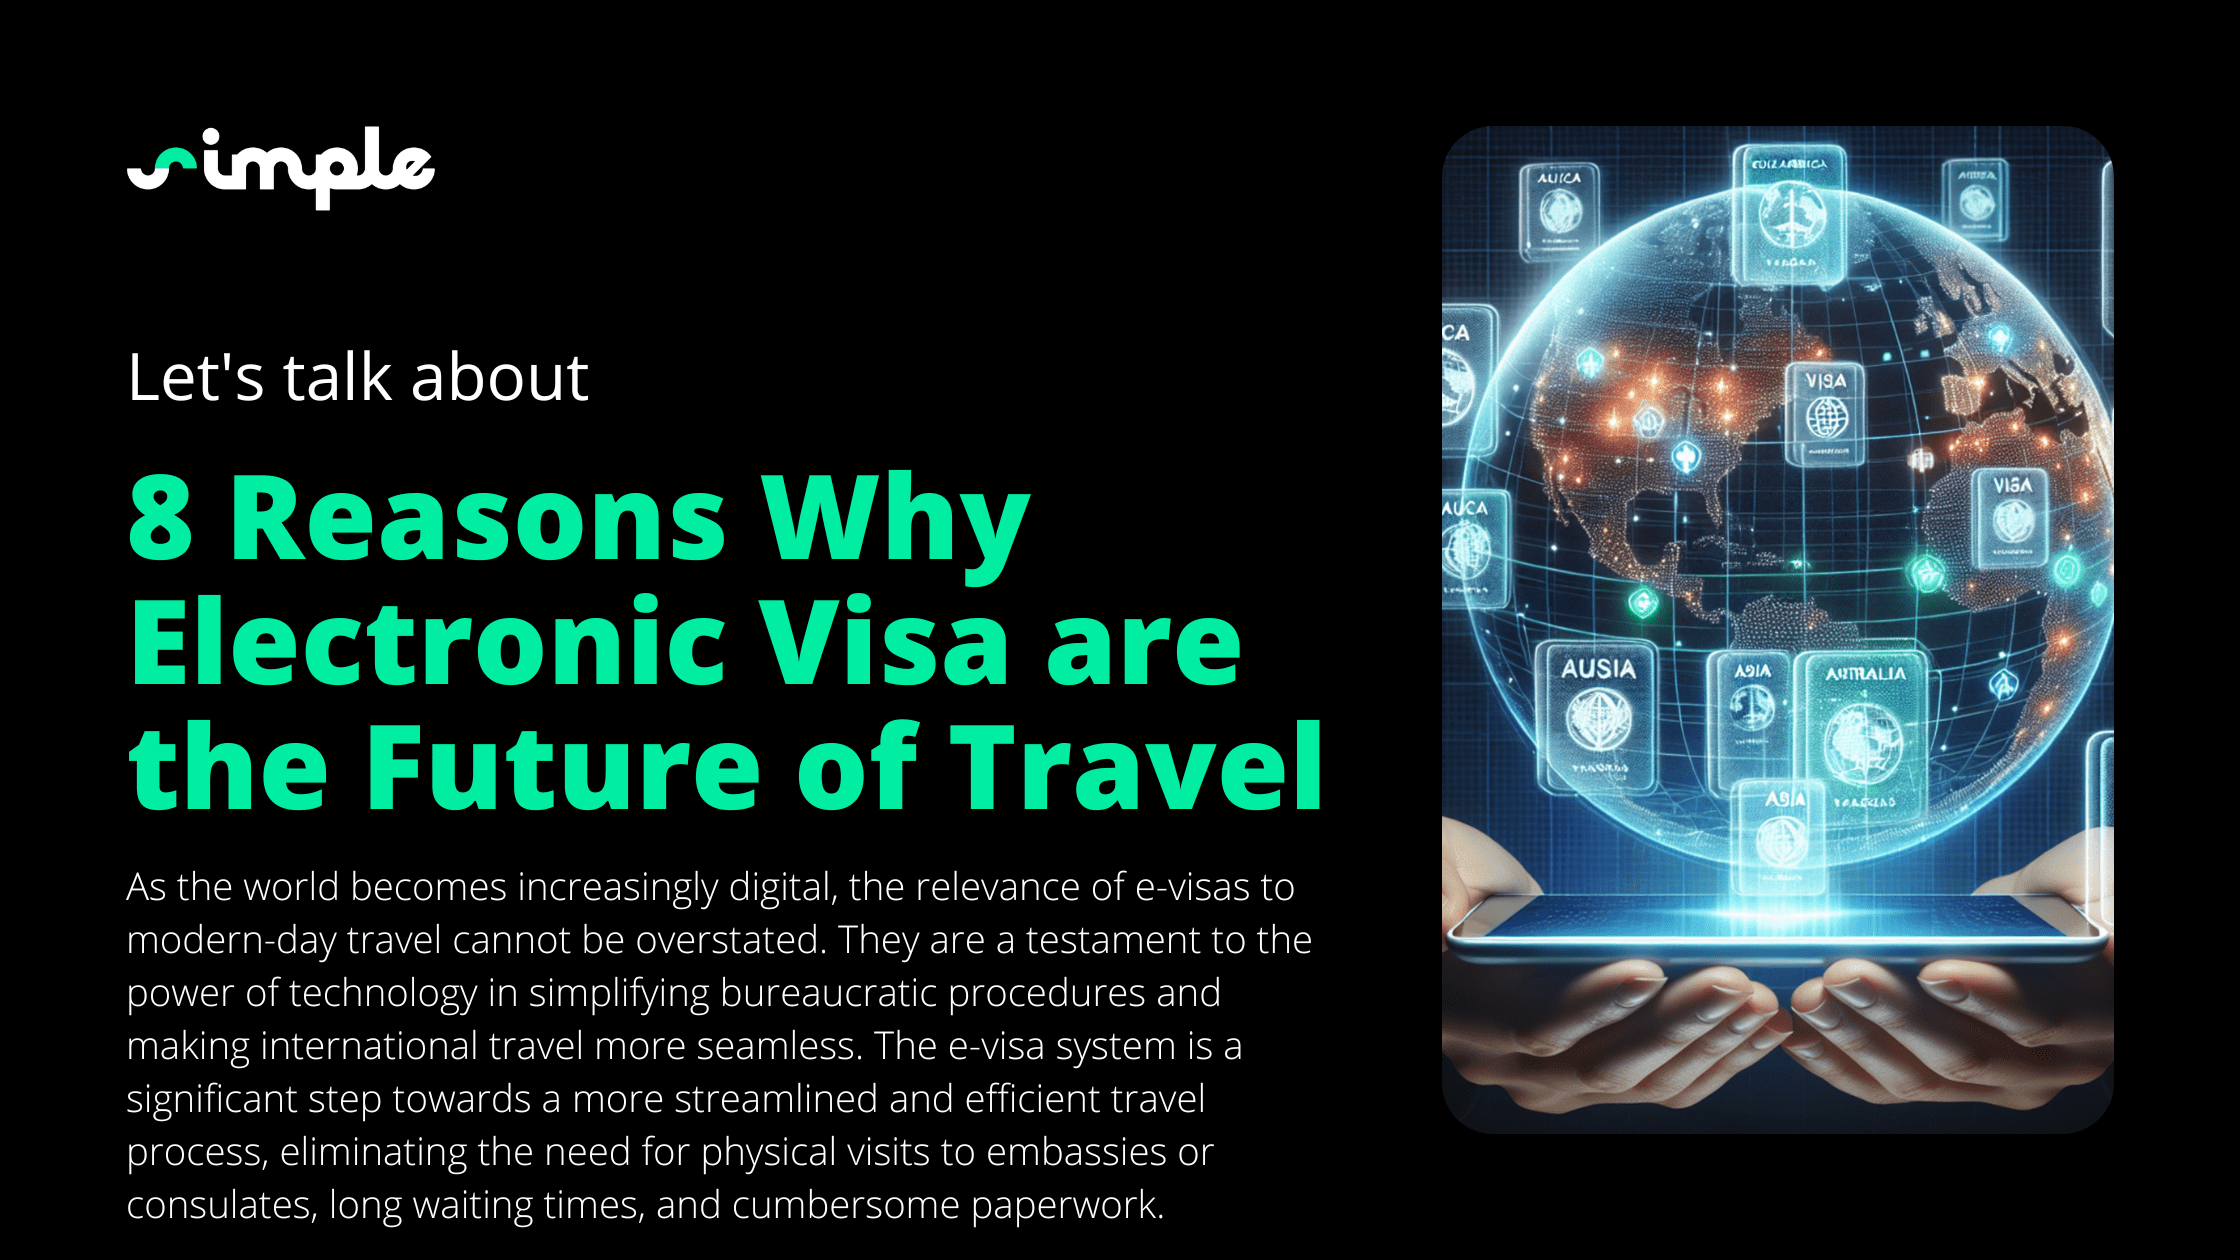 8 Reasons Why Electronic Visa are the Future of Travel